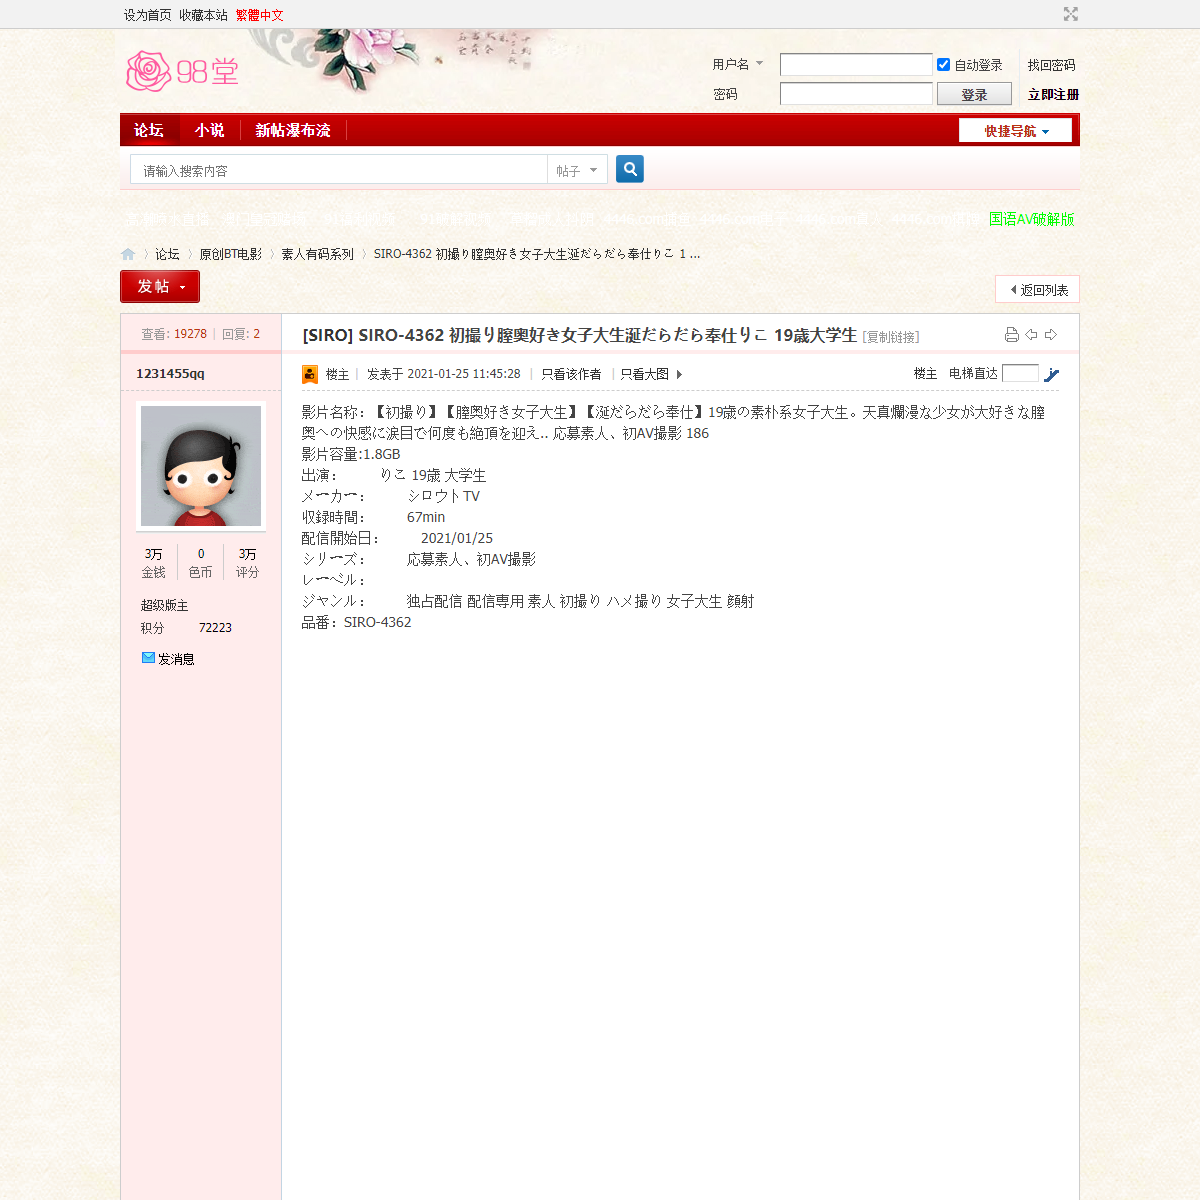 A complete backup of https://www.sehuatang.net/thread-456812-1-1.html